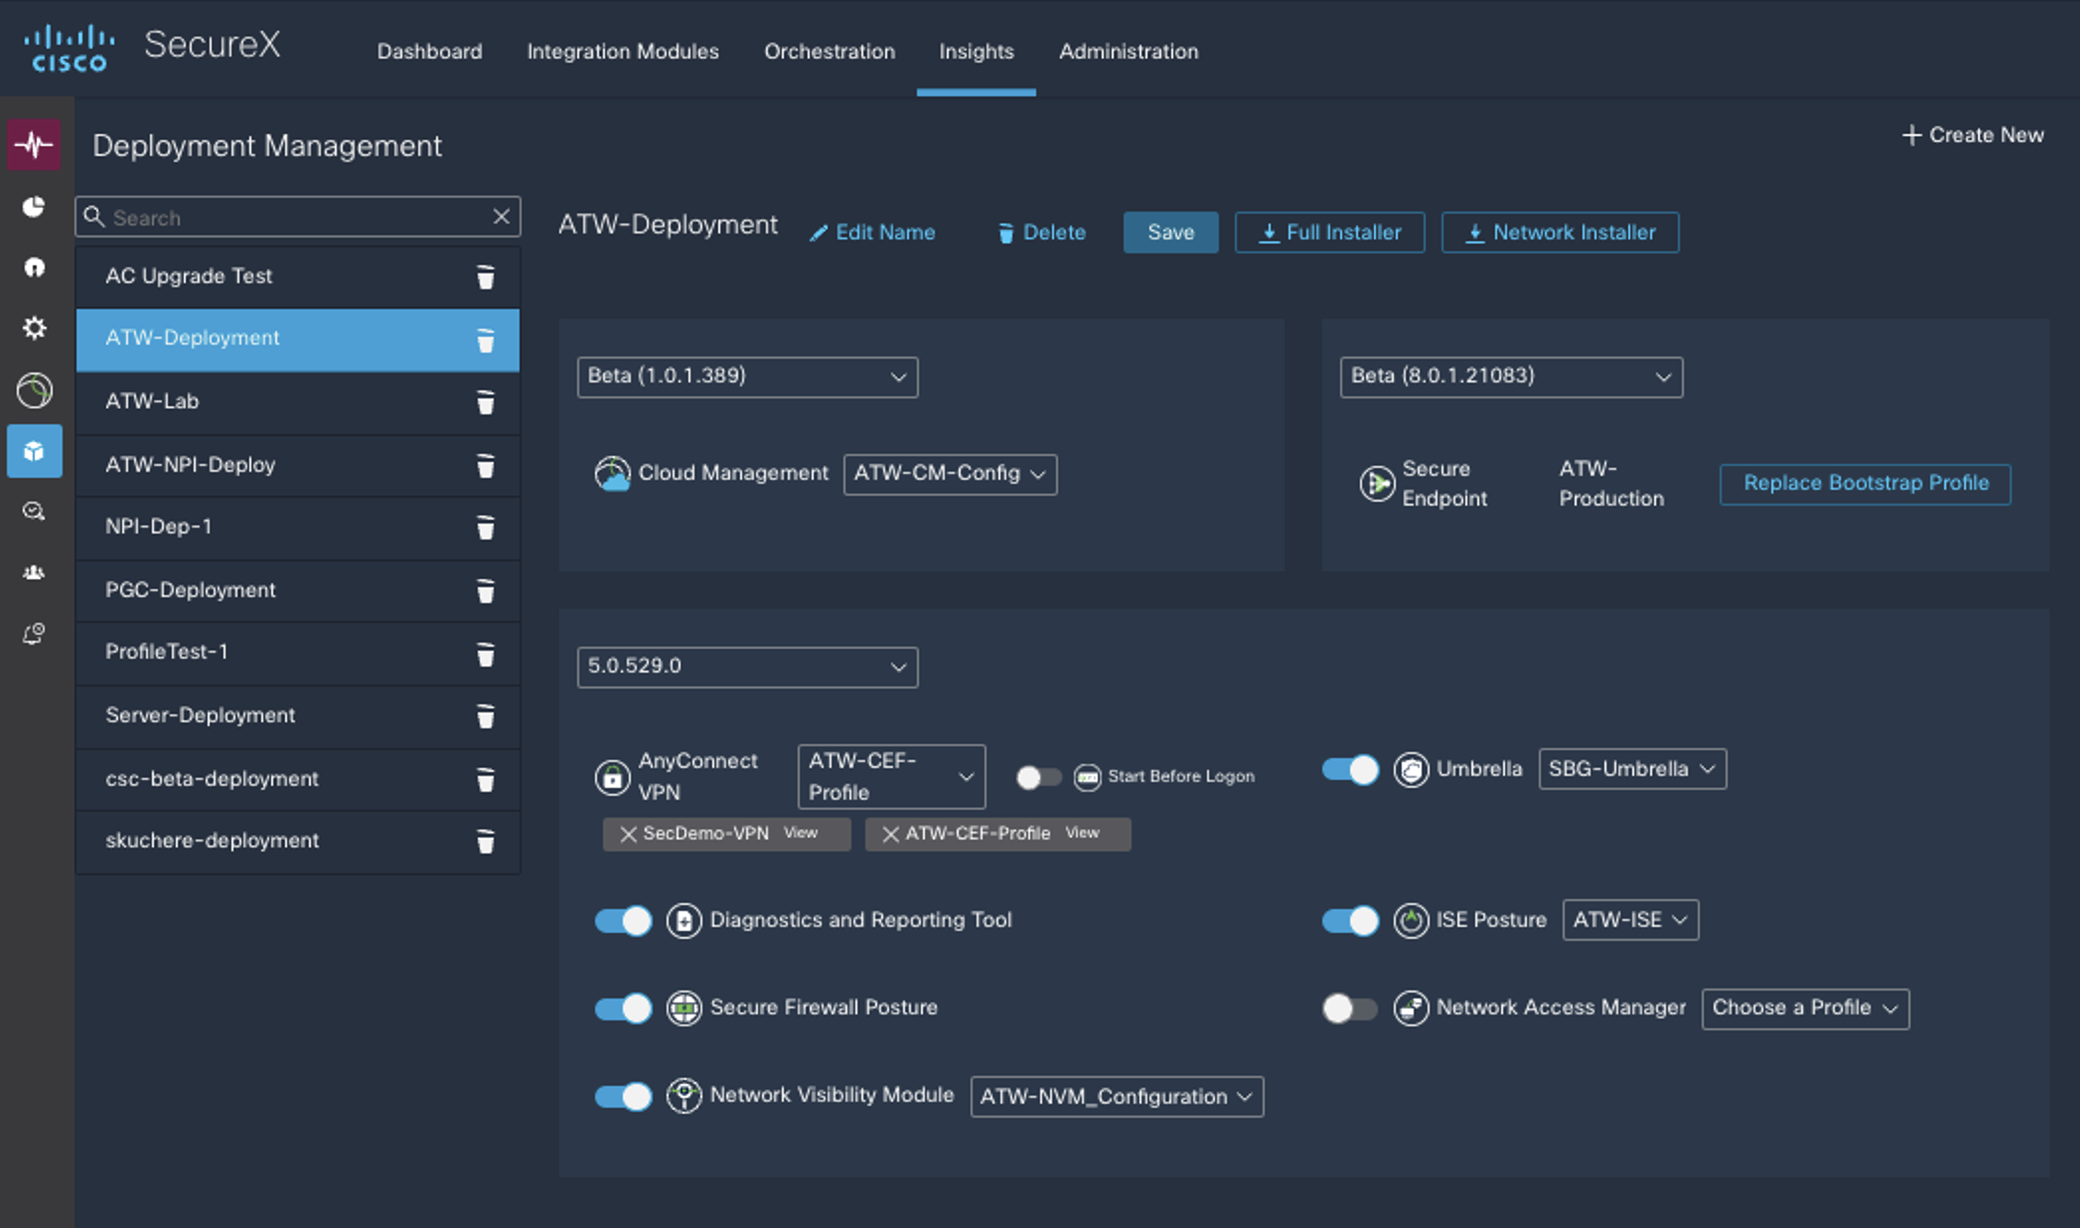 Screengrab of the Securex Threat Response tool, showing new Secure Client features.